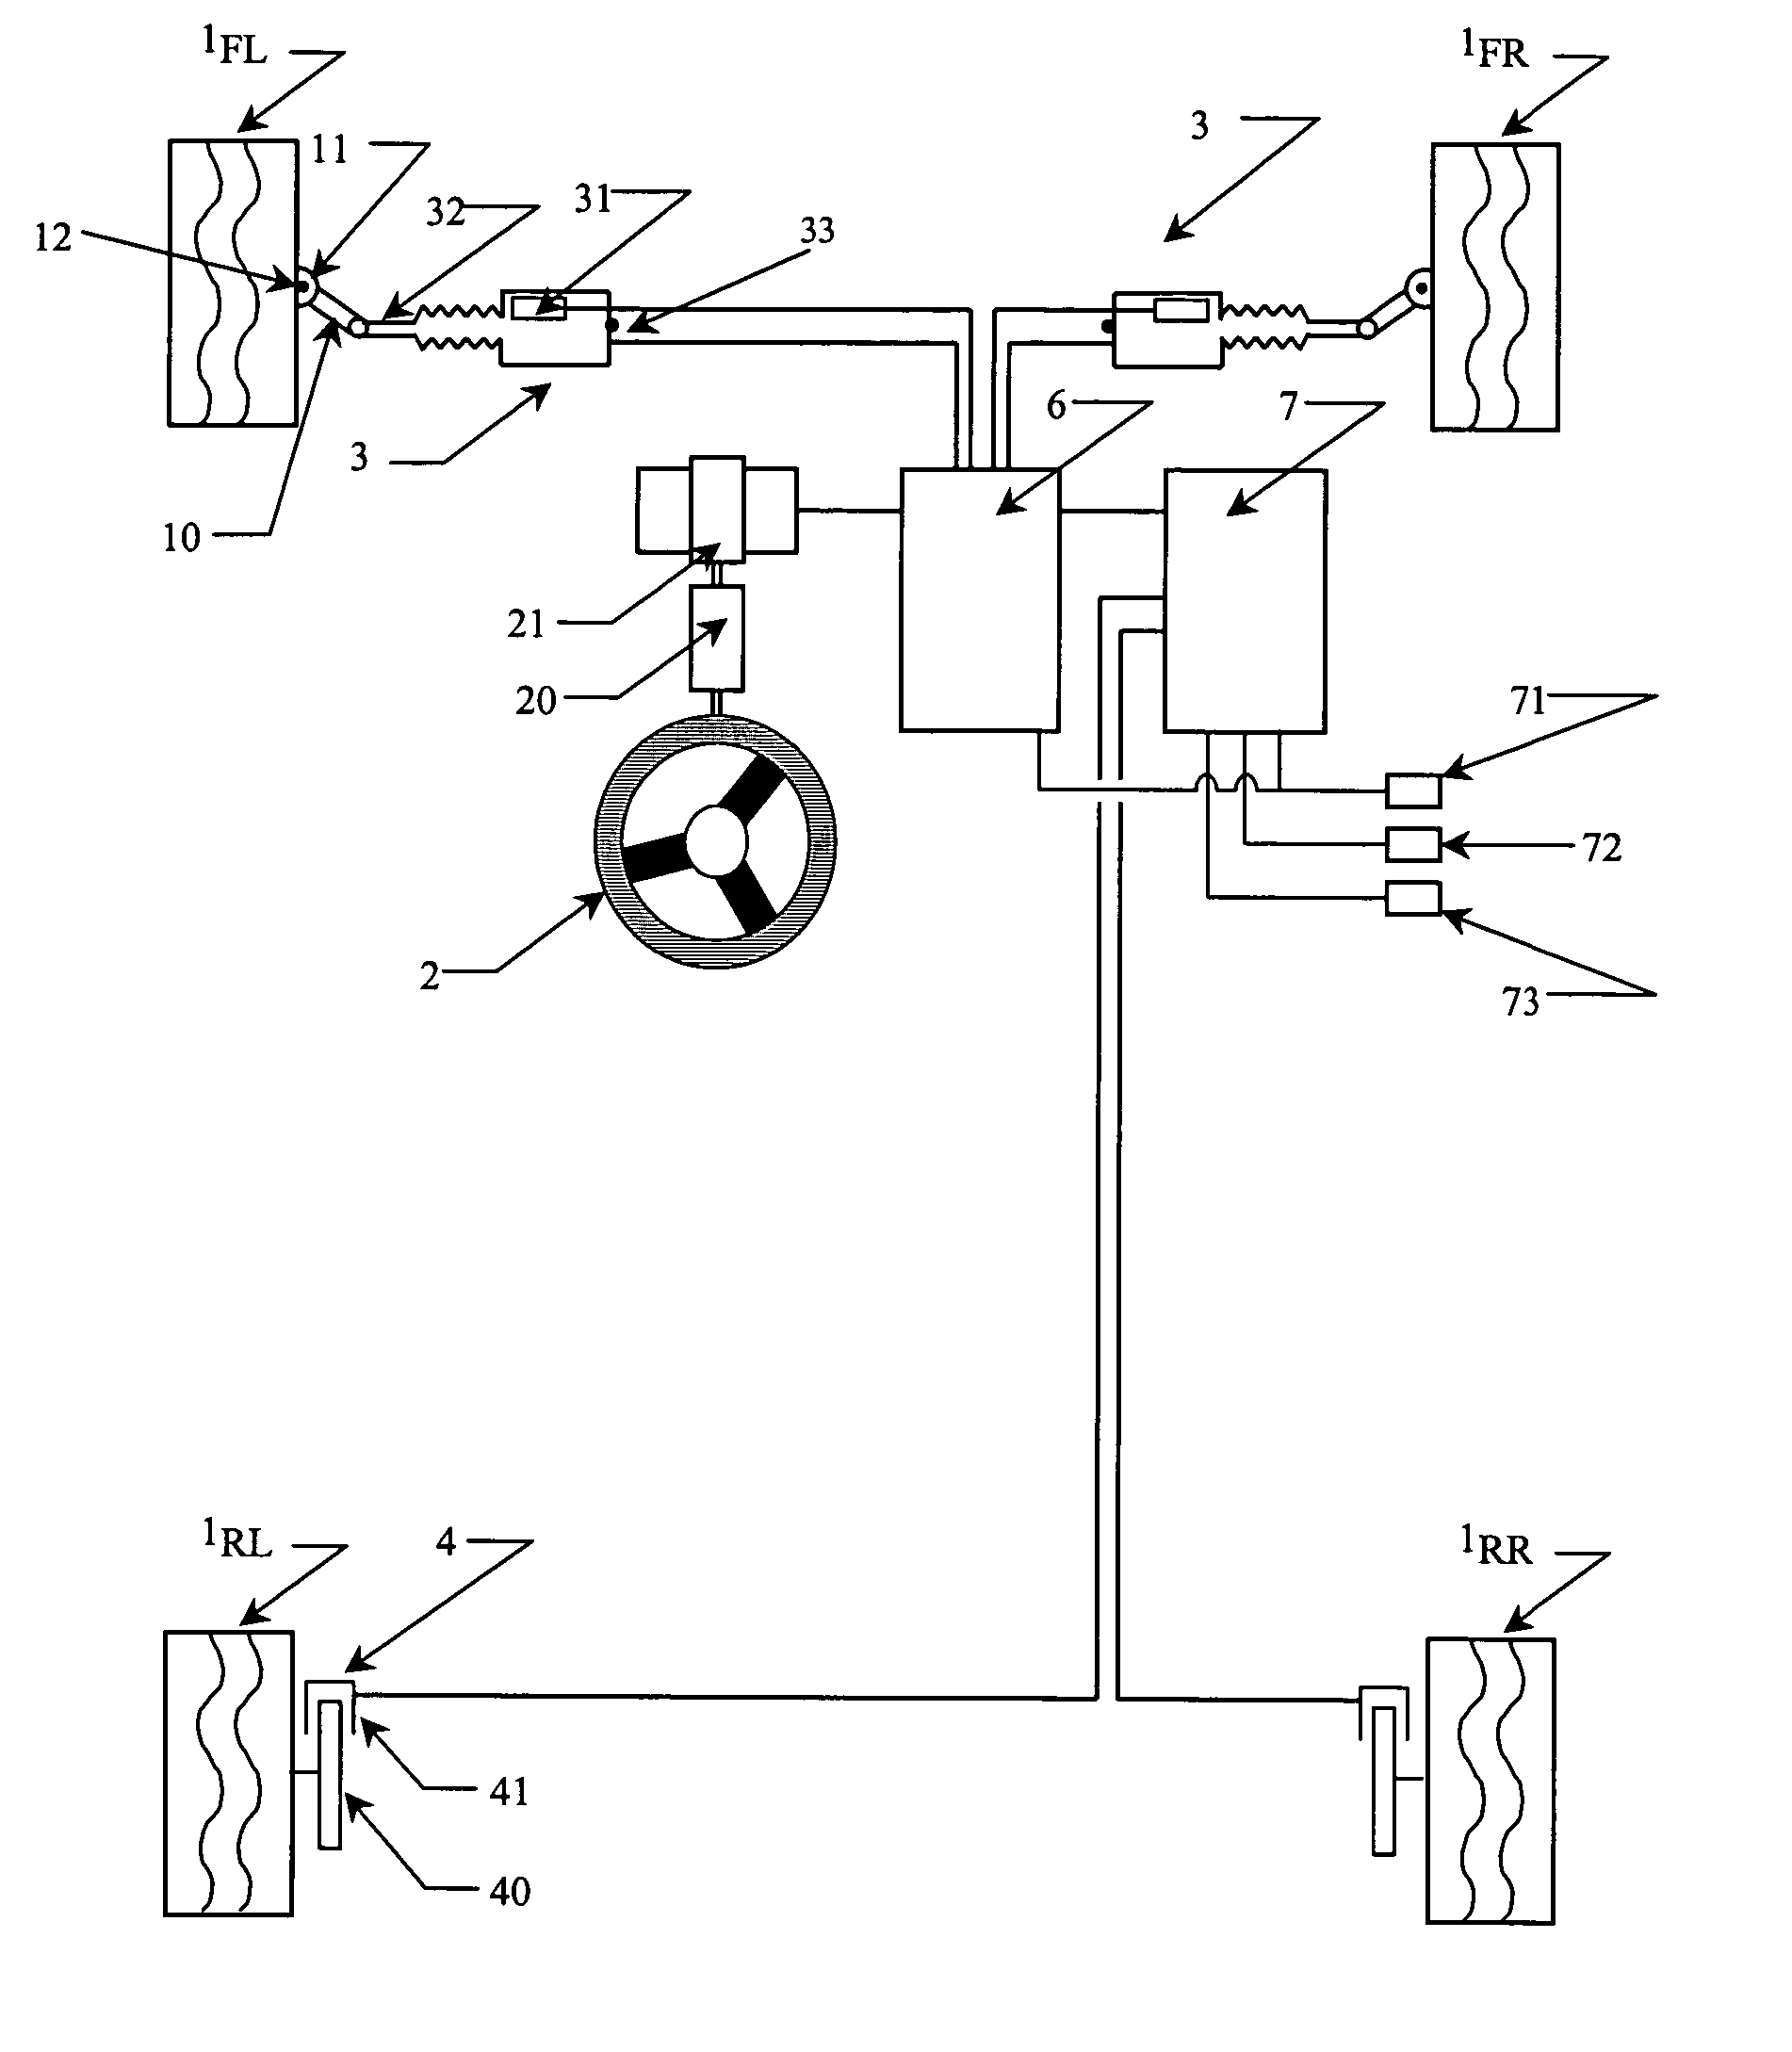 System for steering a vehicle, having a degraded mode in the event of failure of a wheel steering actuator